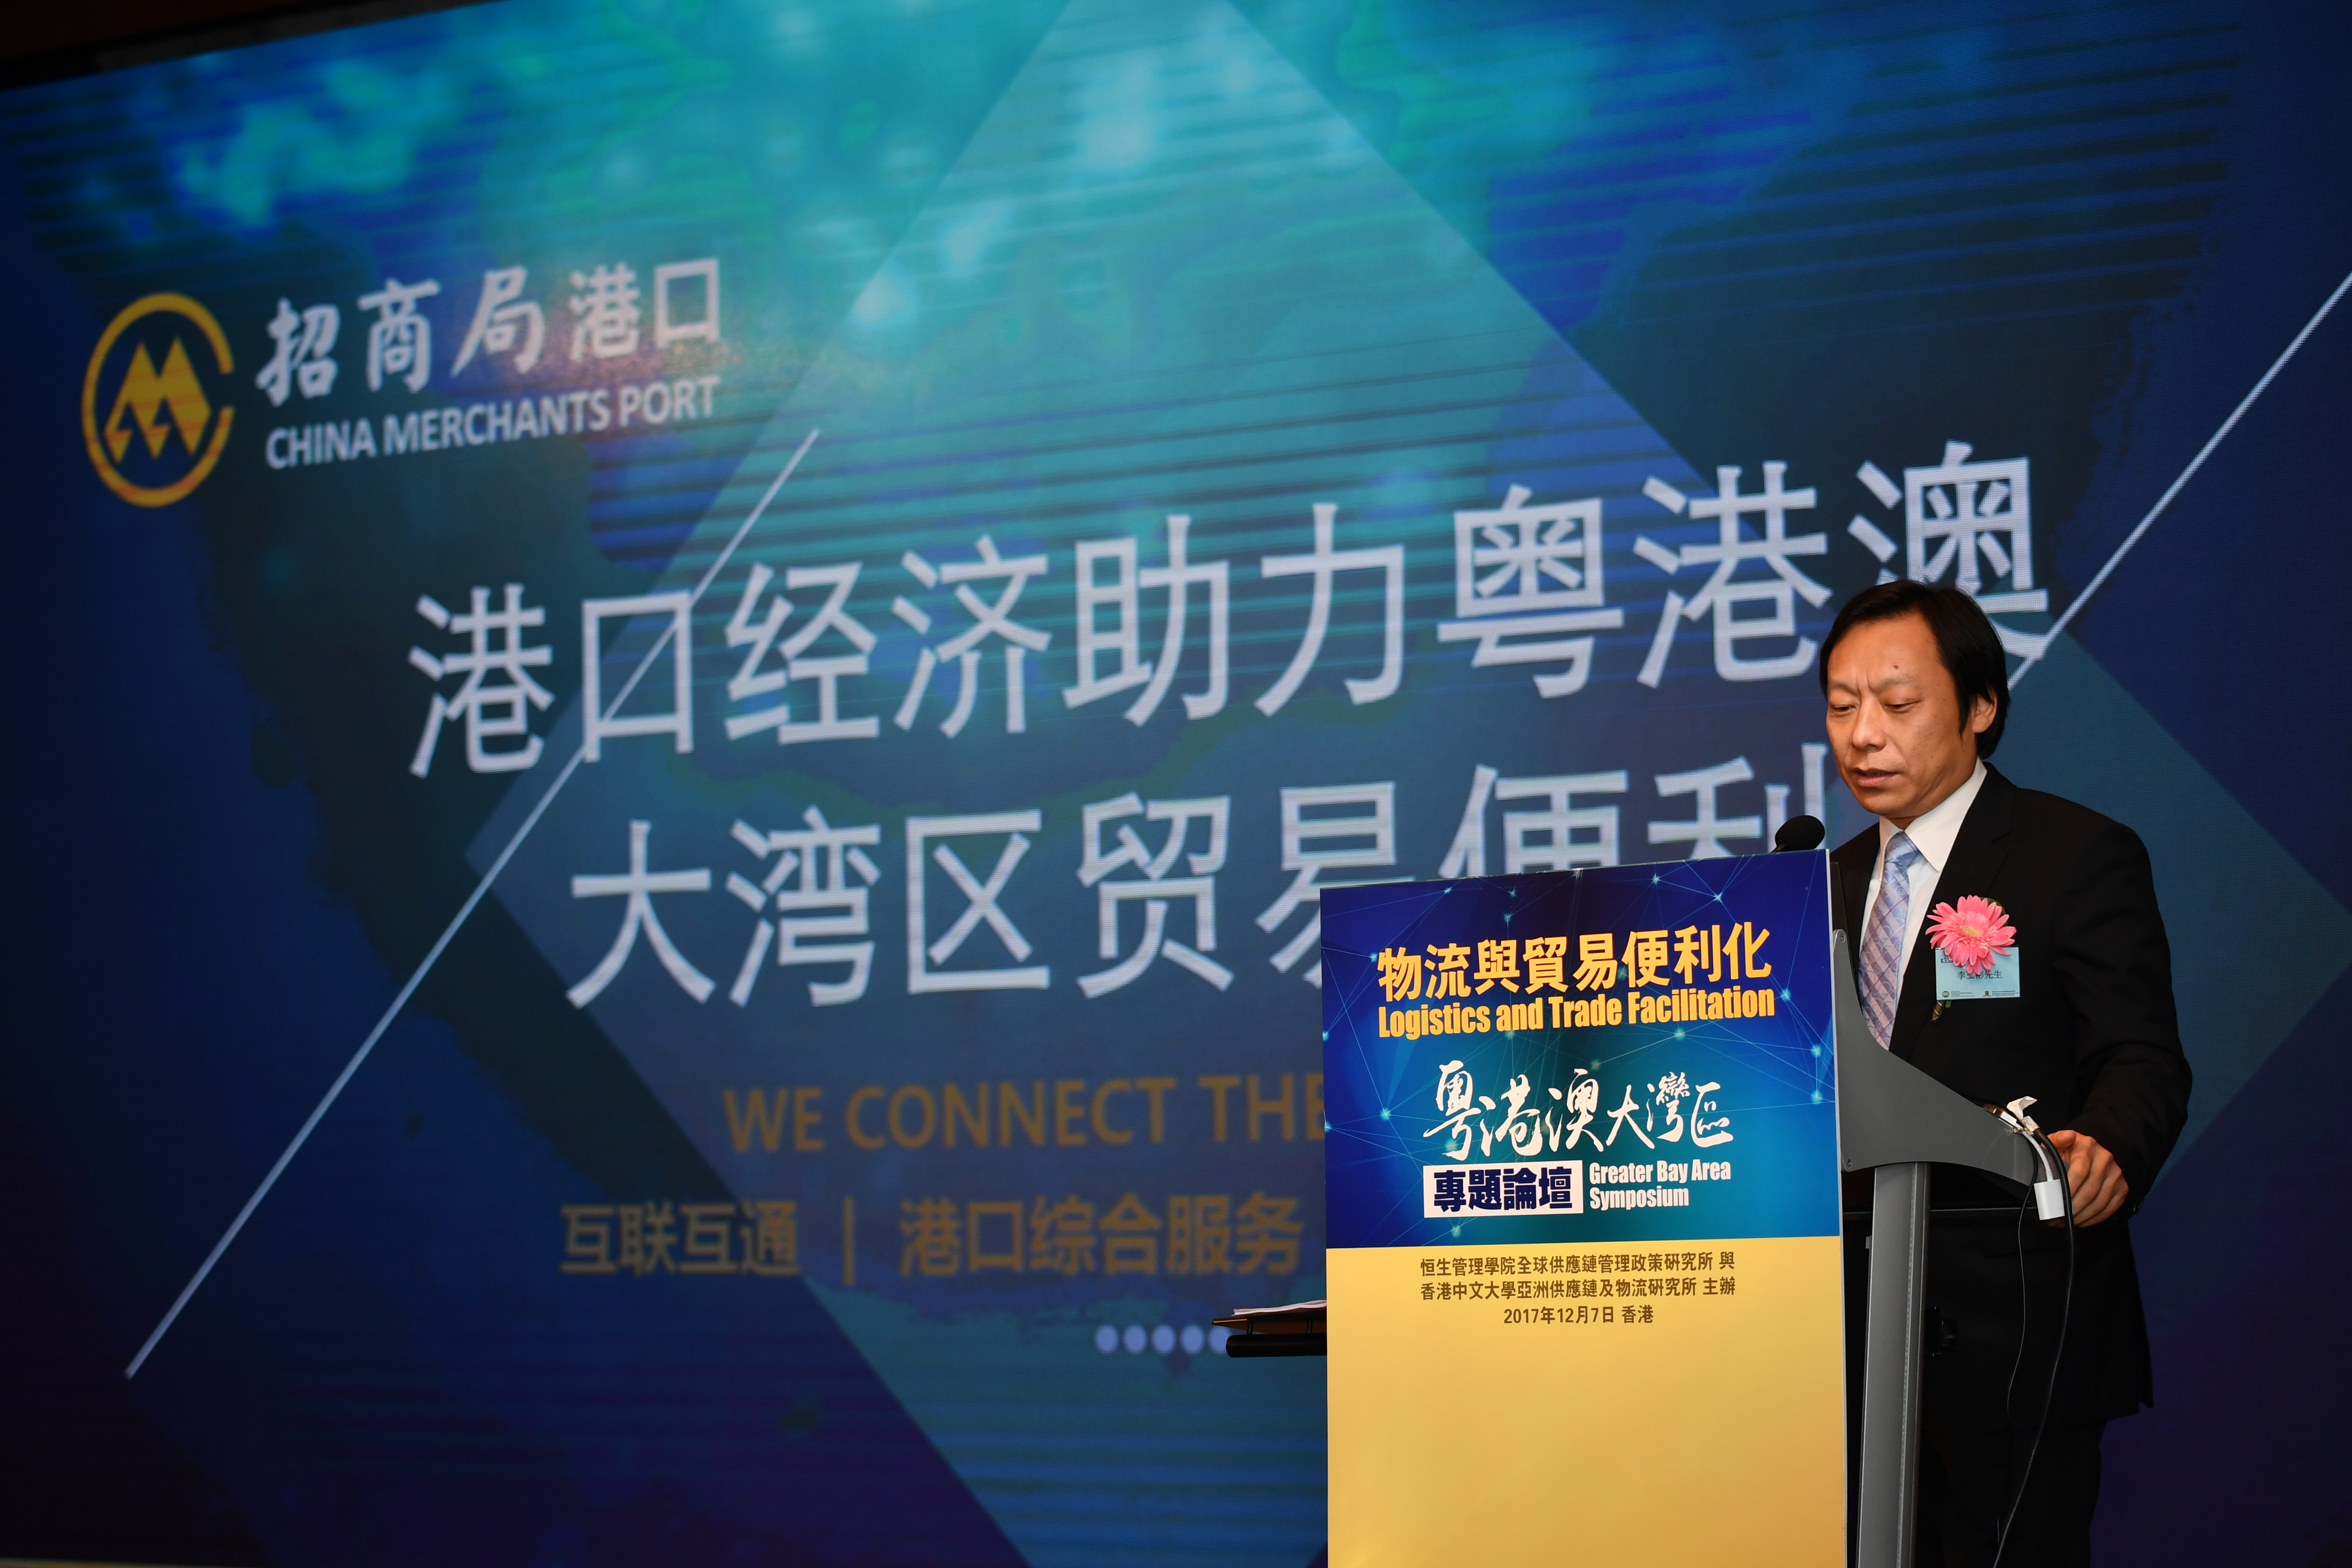 Dr Li Yubin, Deputy General Manager of China Merchants Port Holdings Company Limited, delivered a keynote speech.